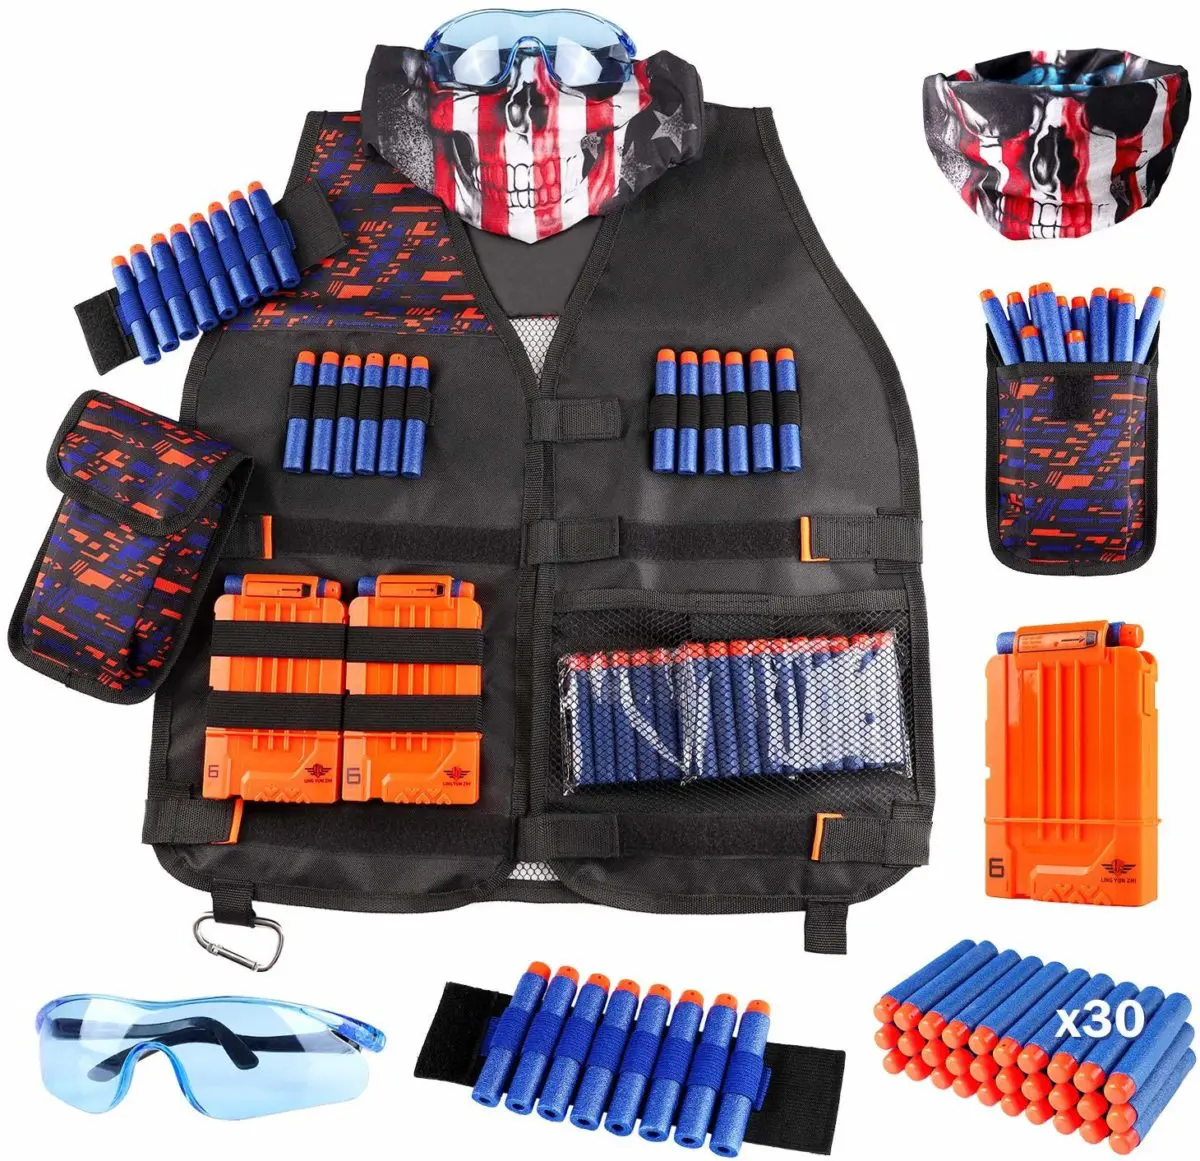 Kids Tactical Vest Kit for Nerf Guns-N-Strike Elite Series - Top Toys and Gifts for Seven Year Old Boys 1